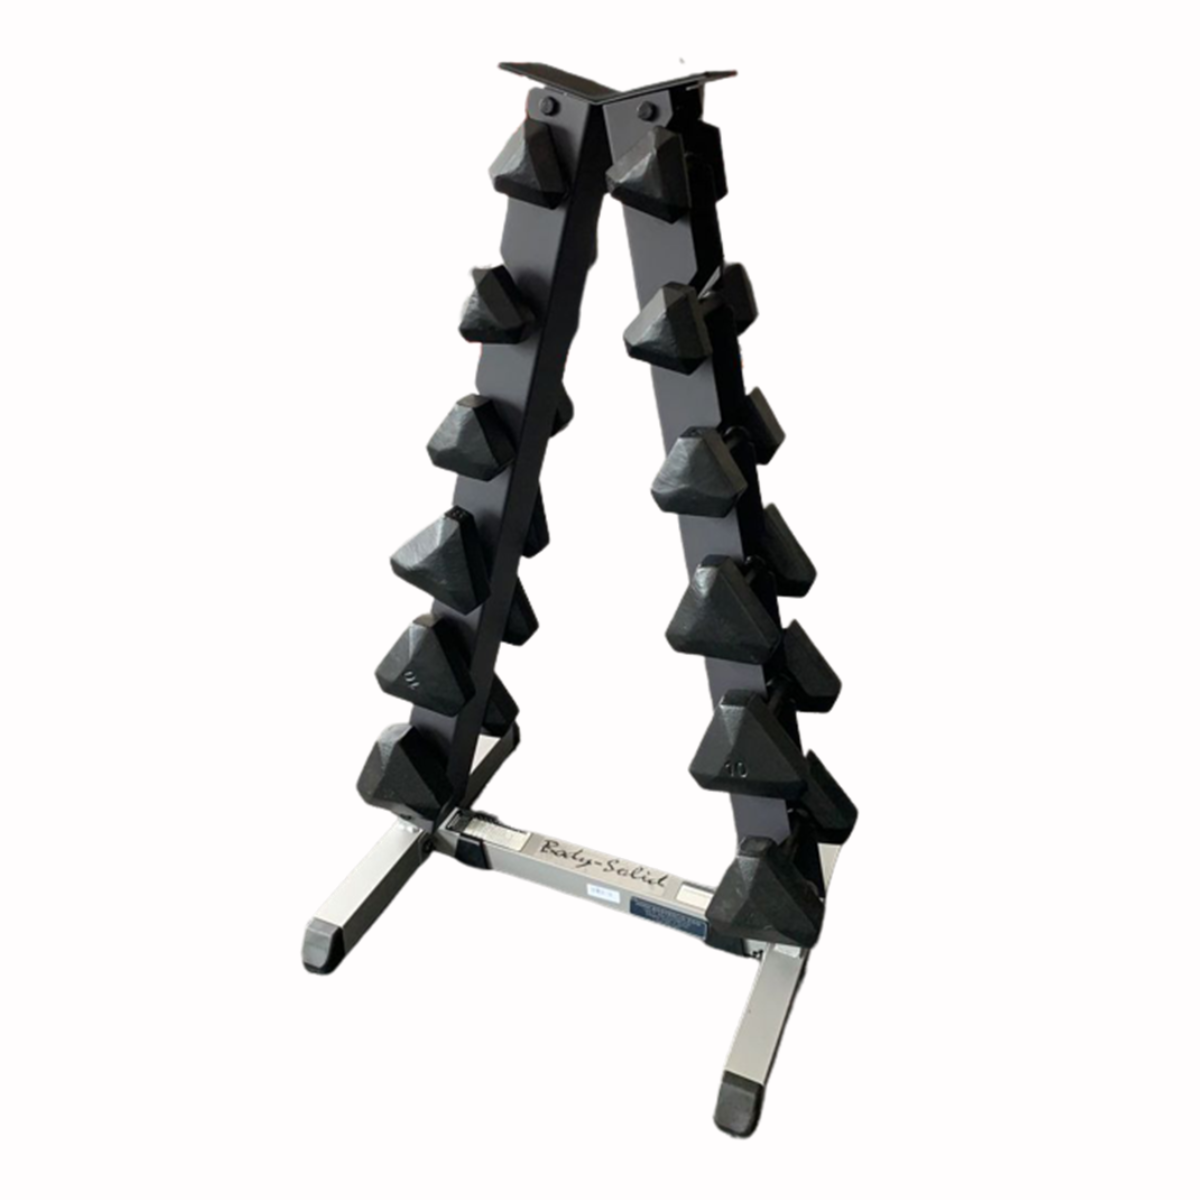 Premium Cast Iron Dumbbell Set with A-Frame Rack